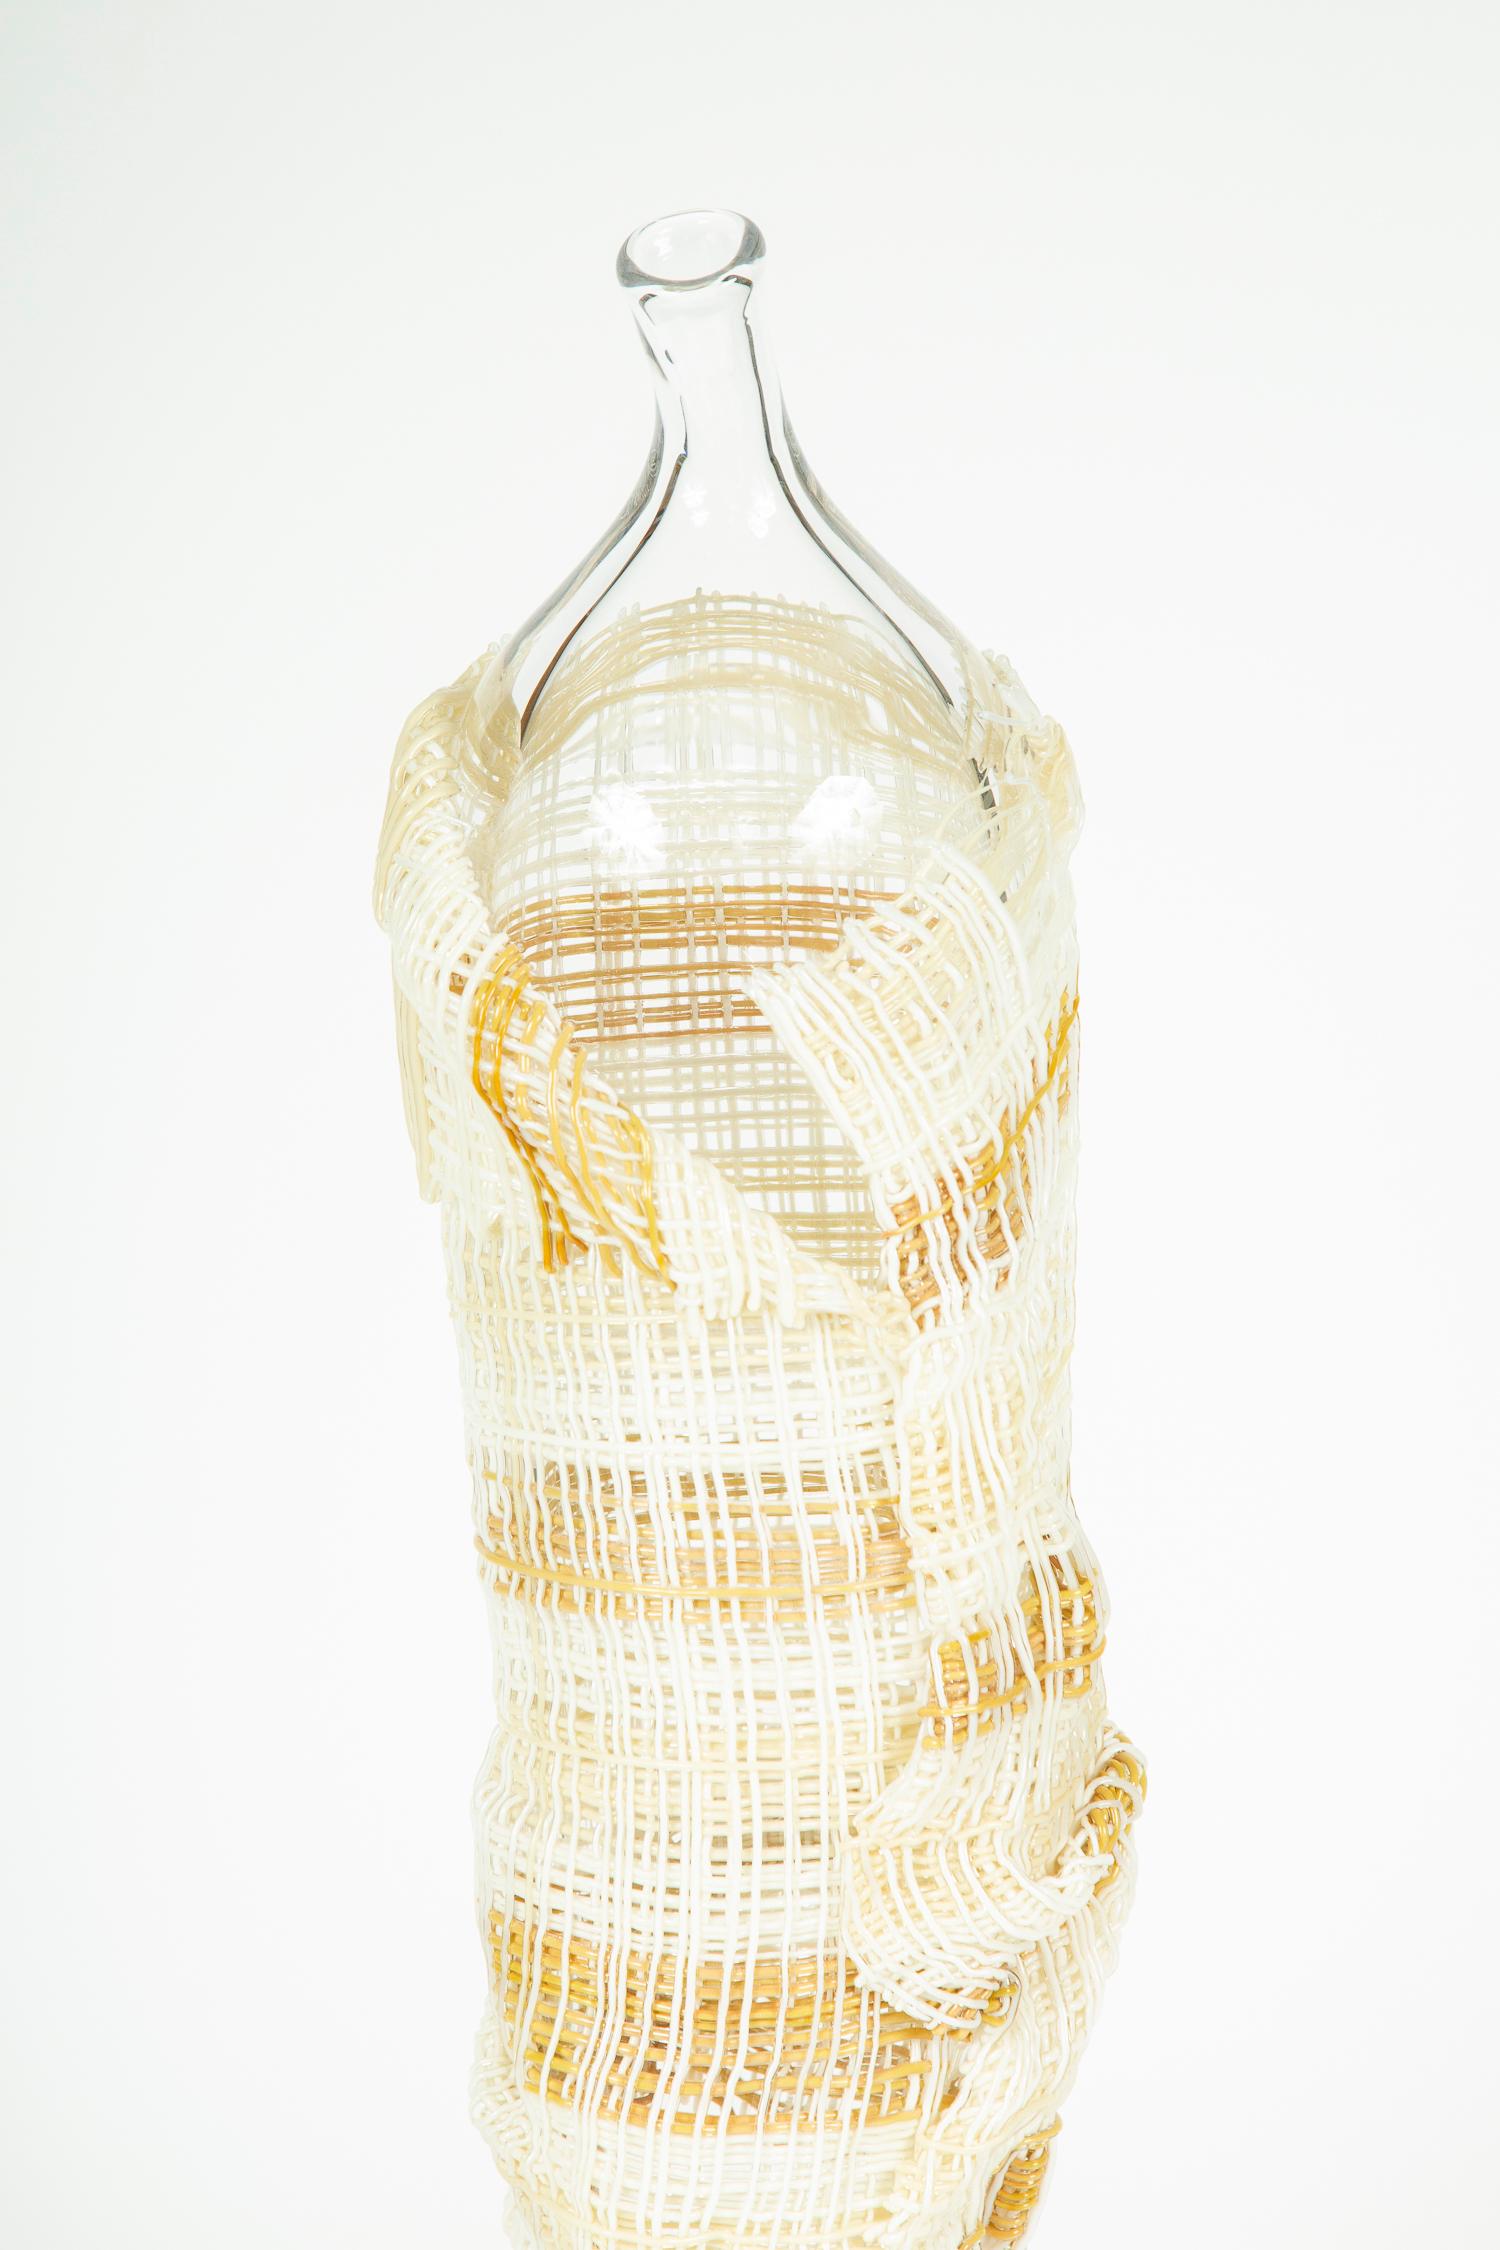 Hand-Crafted Ajax, a Unique clear, cream & taup / camel Glass Sculpture by Cathryn Shilling